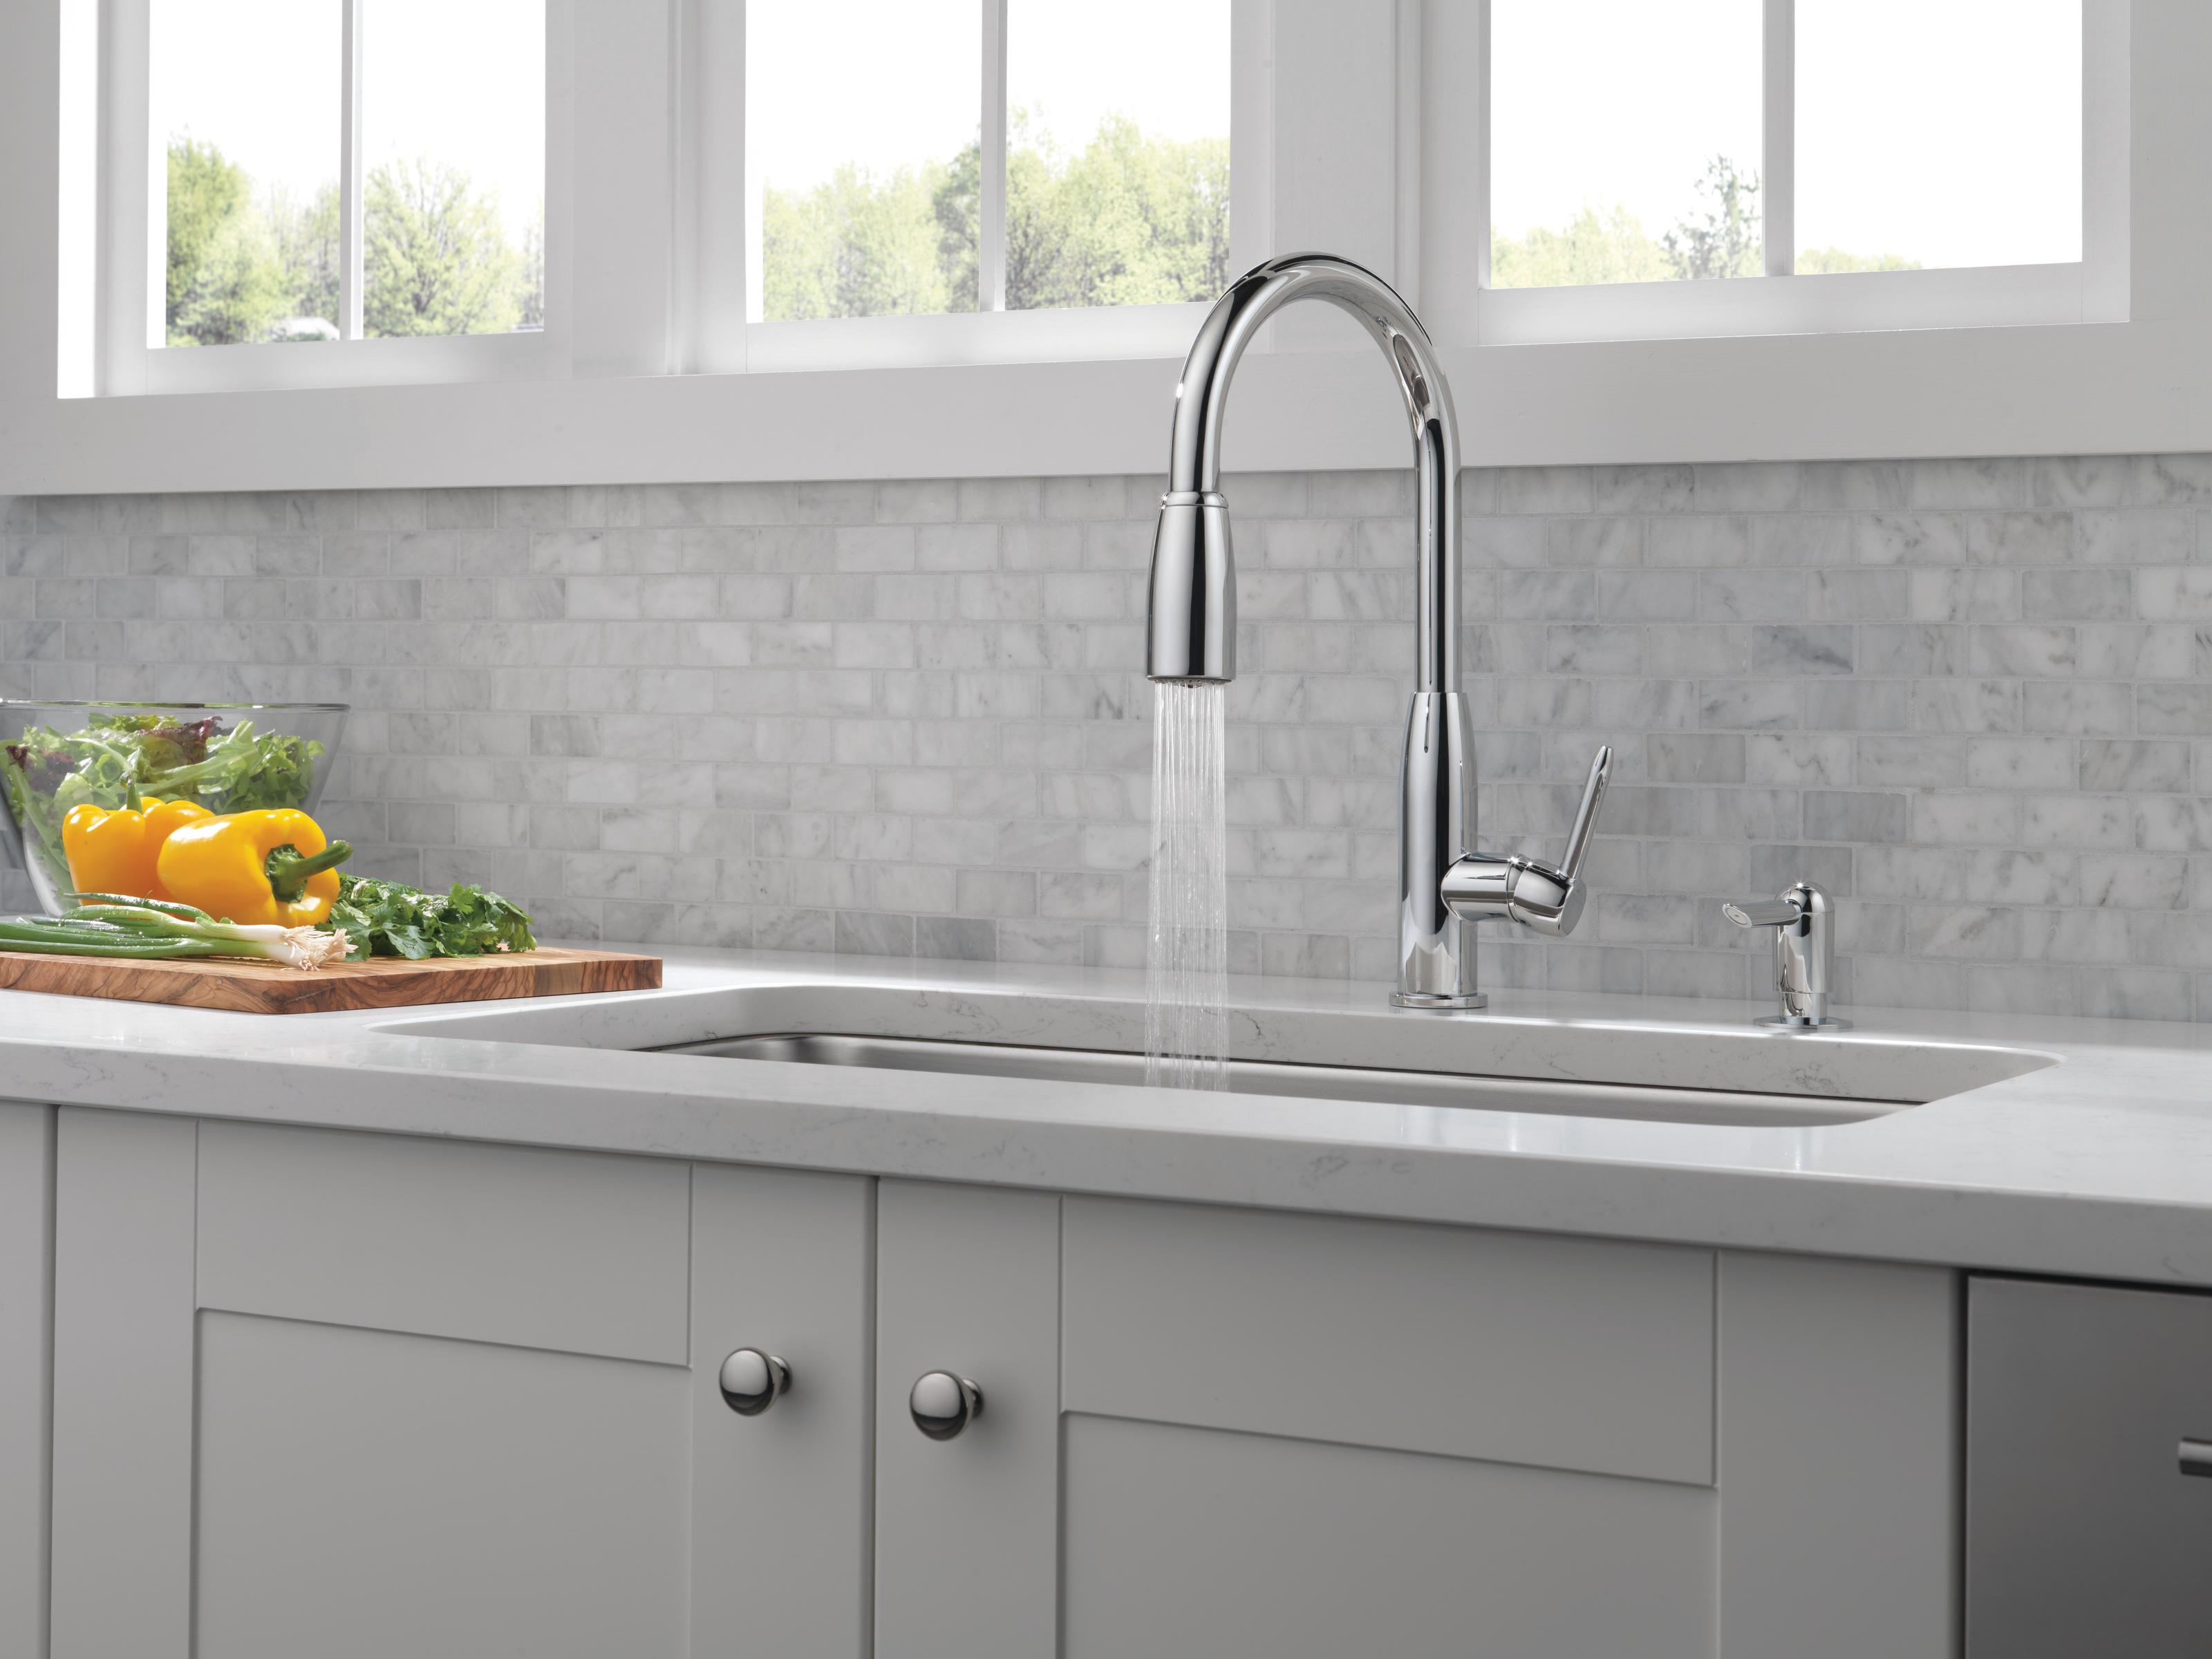 Peerless Core Kitchen Single Handle Pull-Down Faucet in Chrome P88103LF-SD-L - image 2 of 11